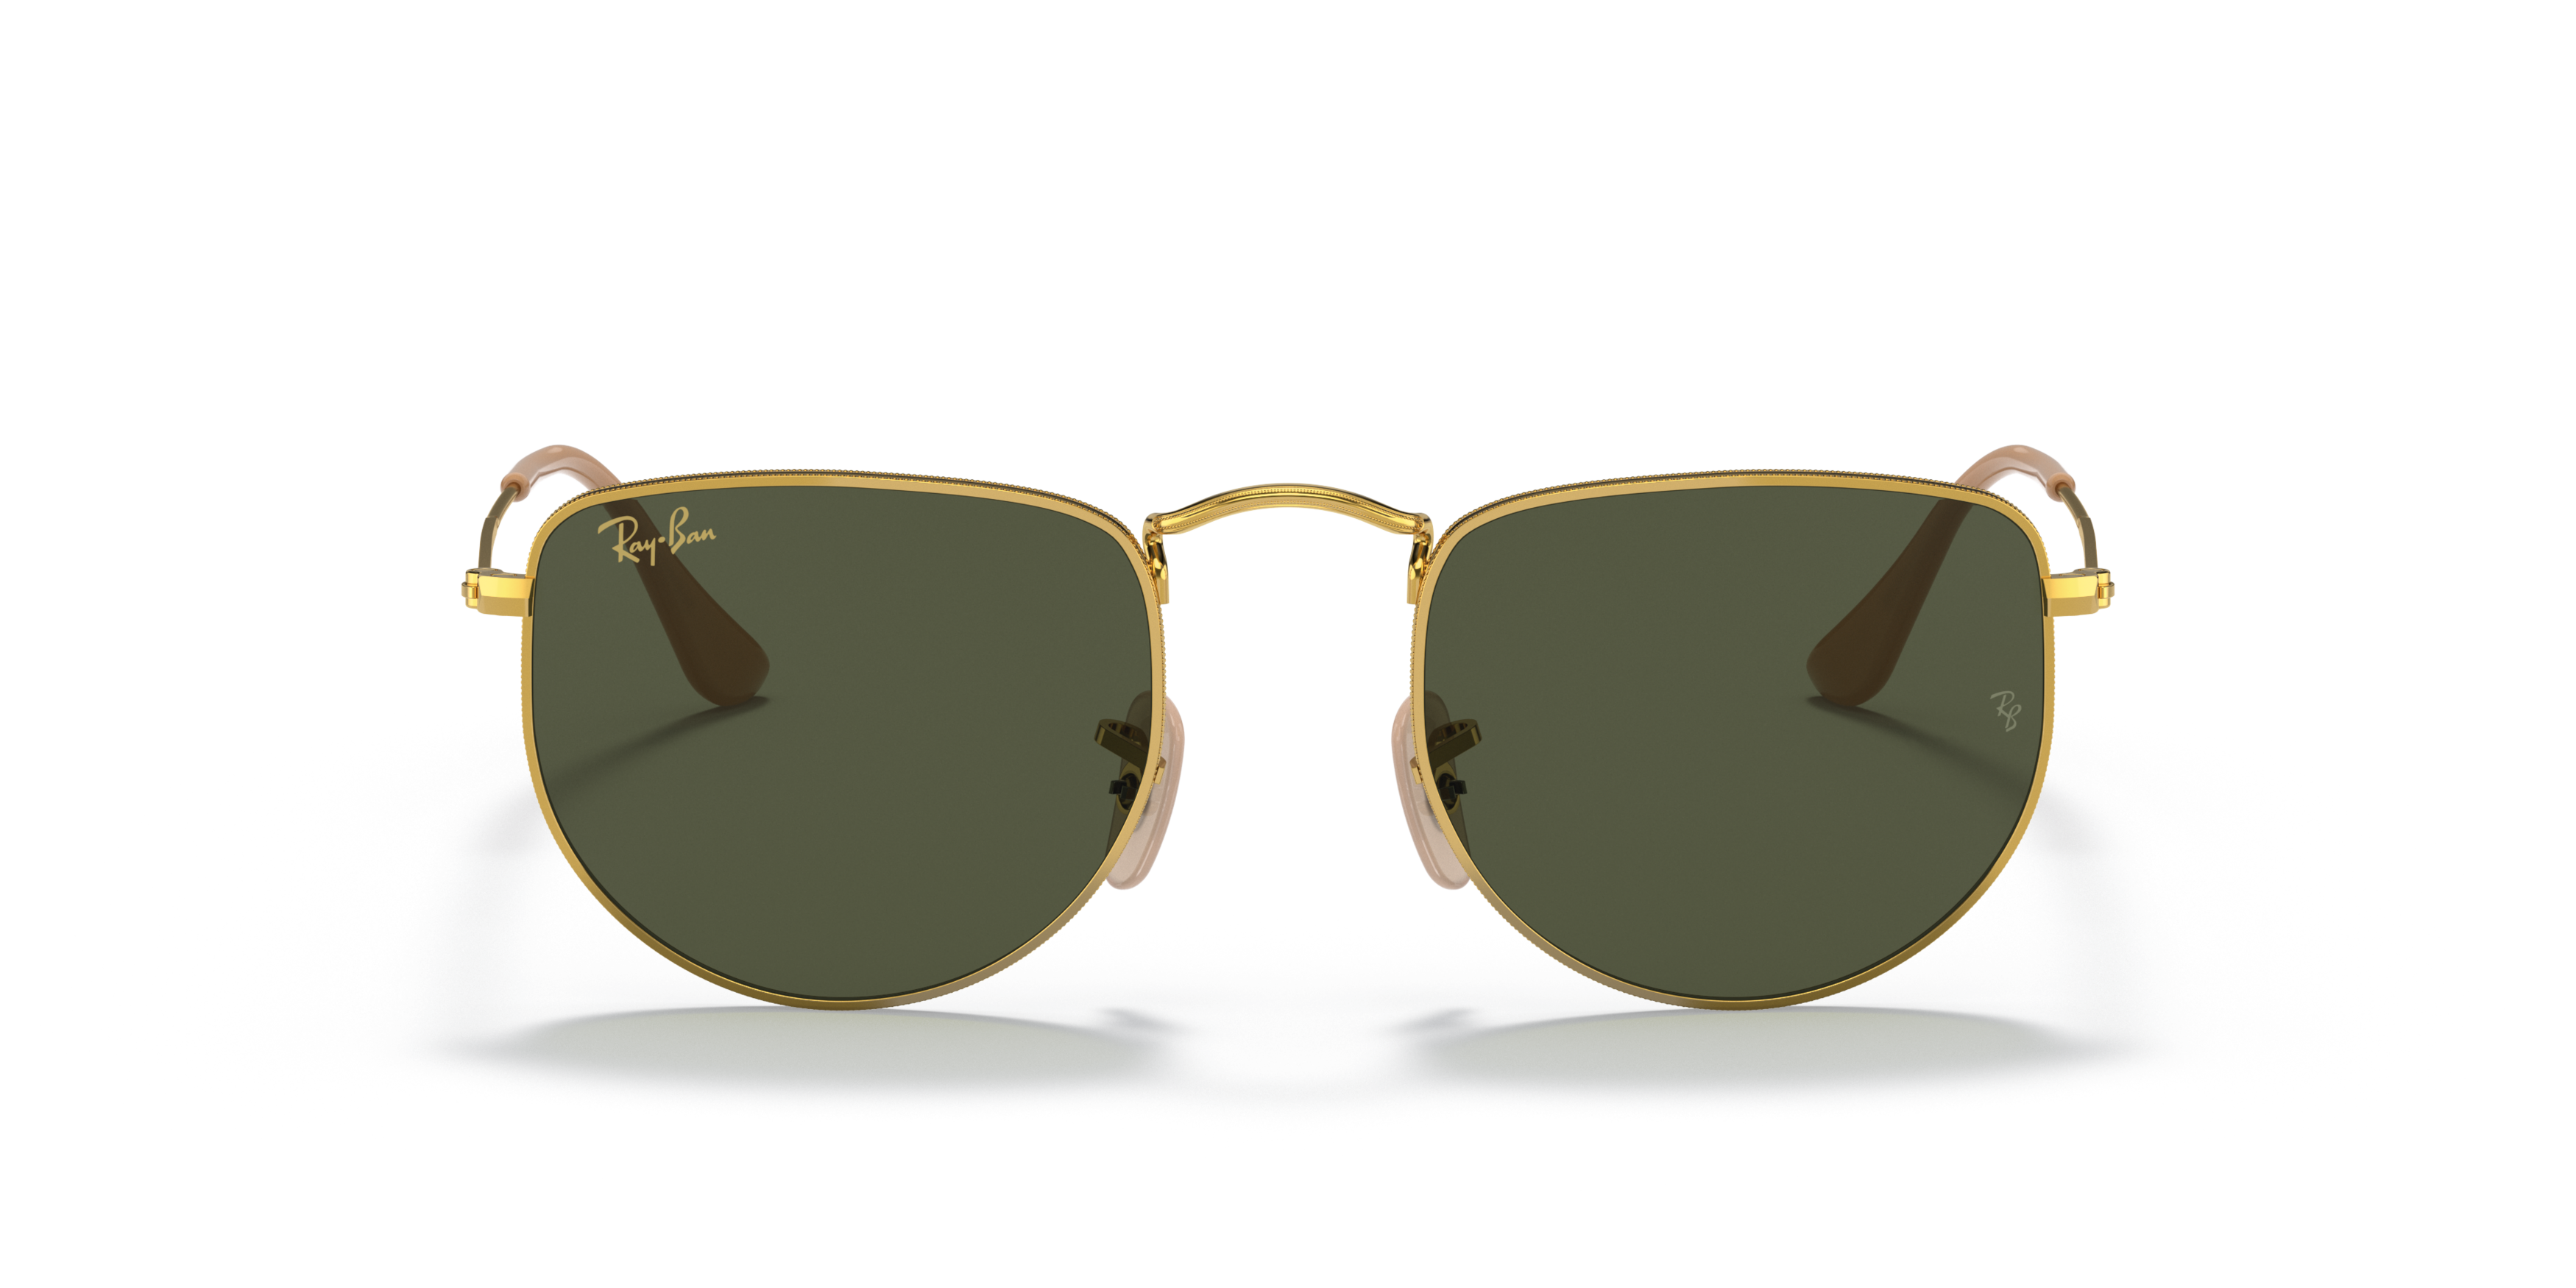 [products.image.front] RAY-BAN RB3958 919631